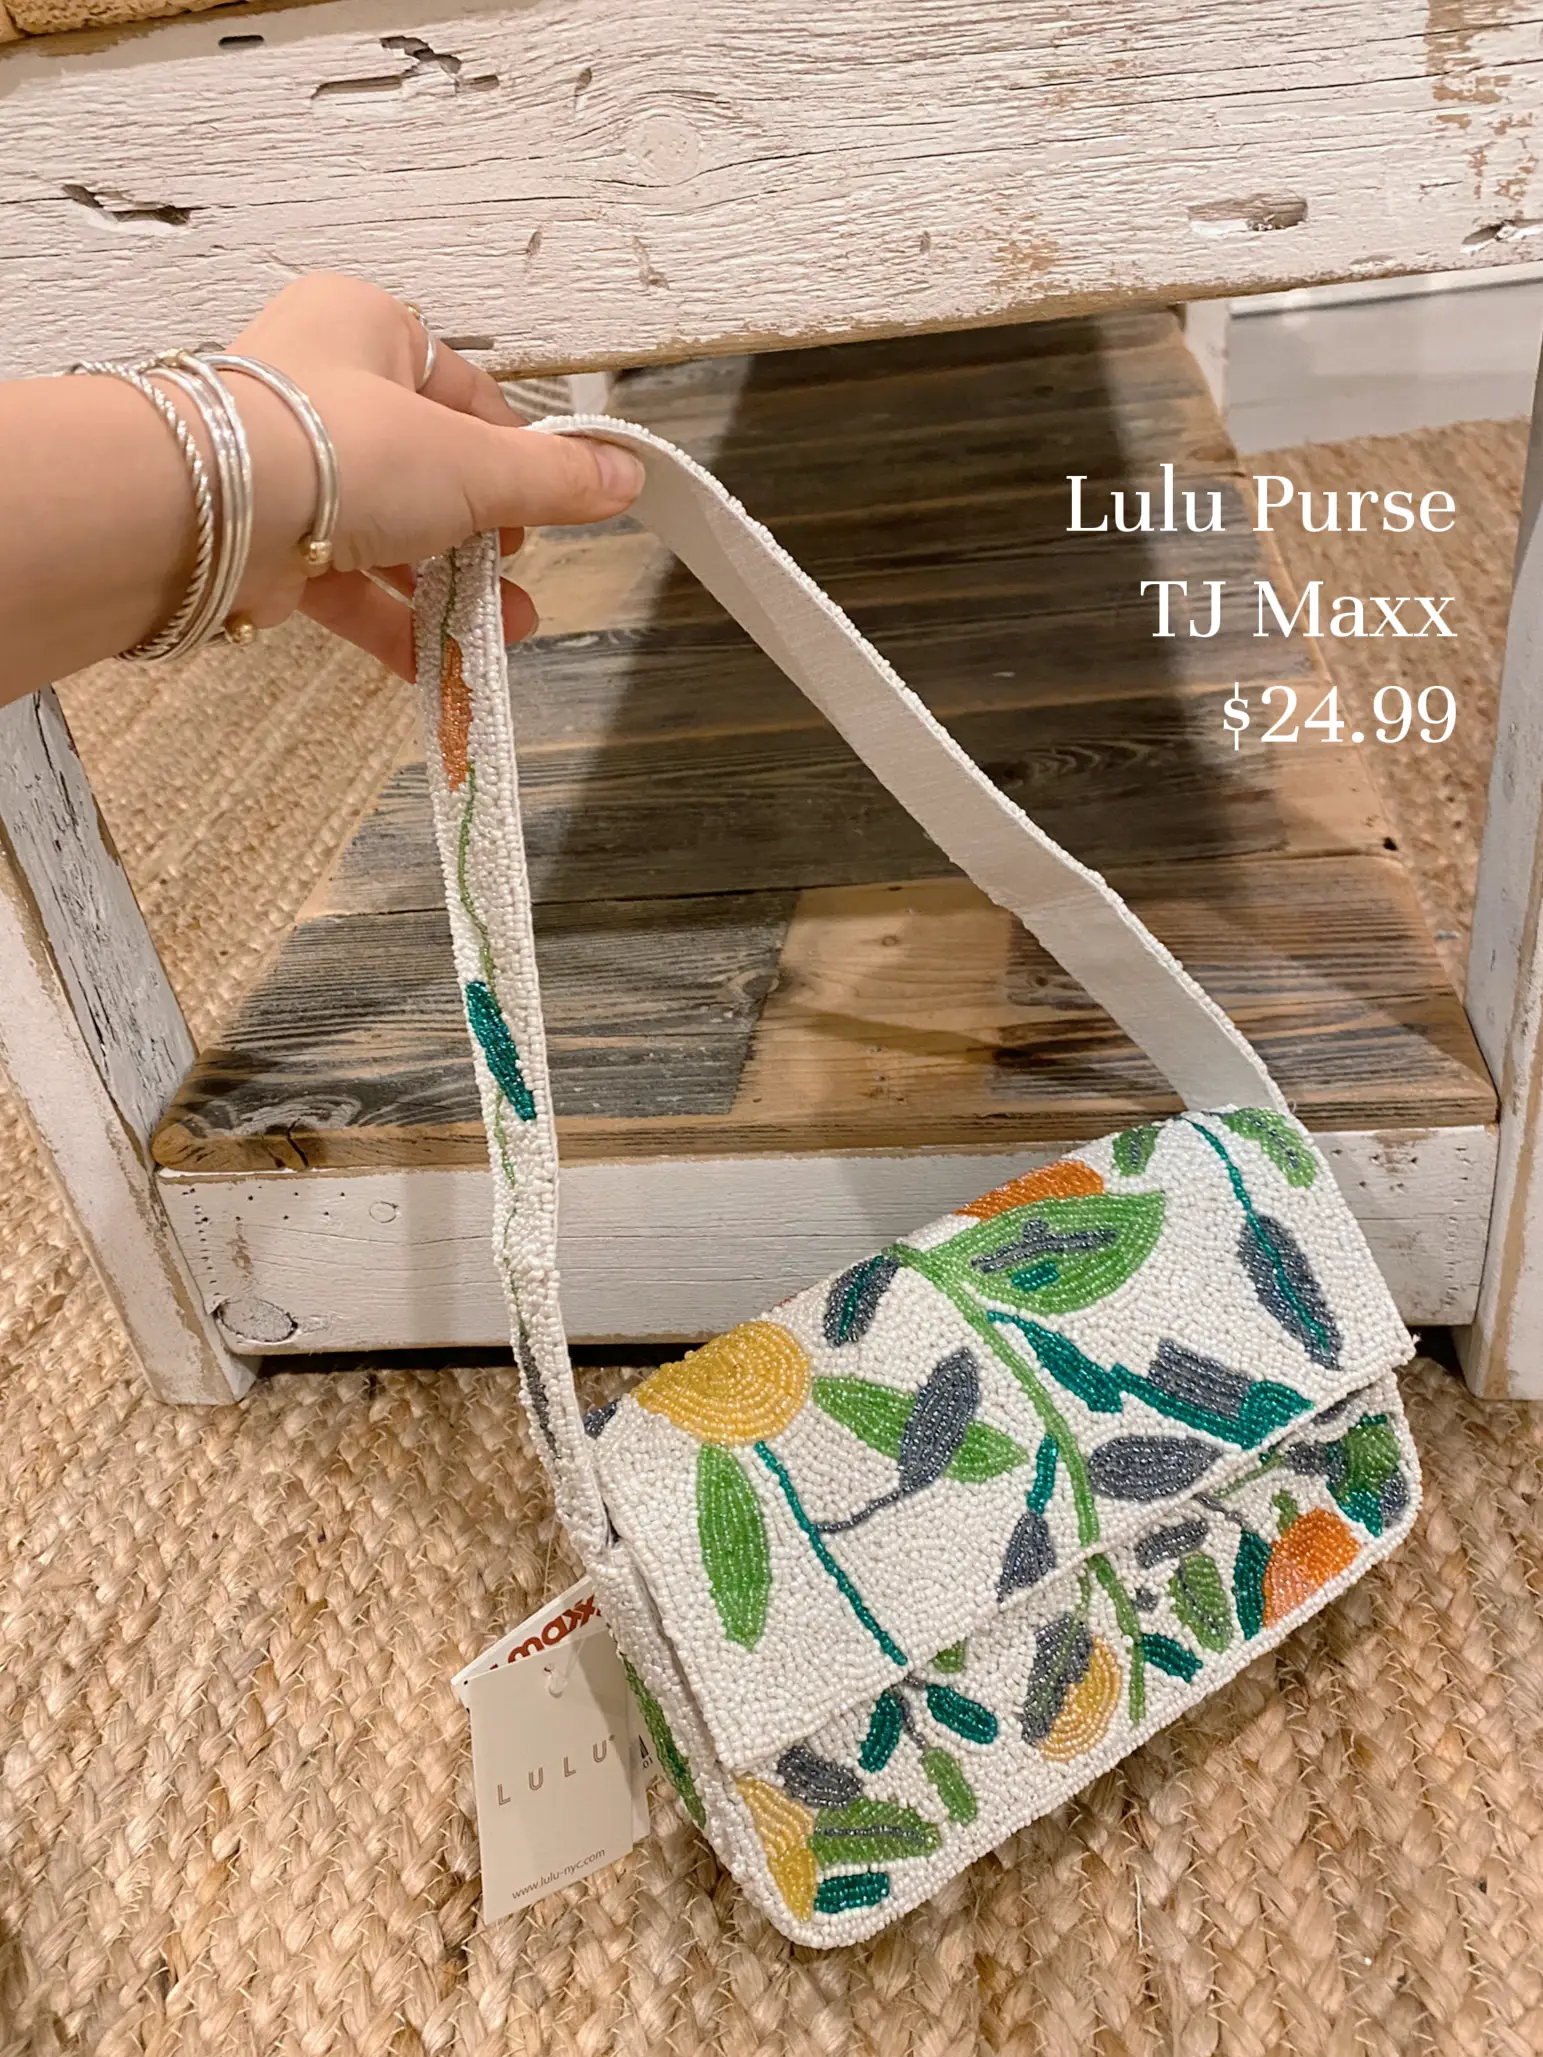 TJ MAXX BAGS NEW COLLECTION 2020  TJ MAXX RED TAGS CLEARANCE SALE